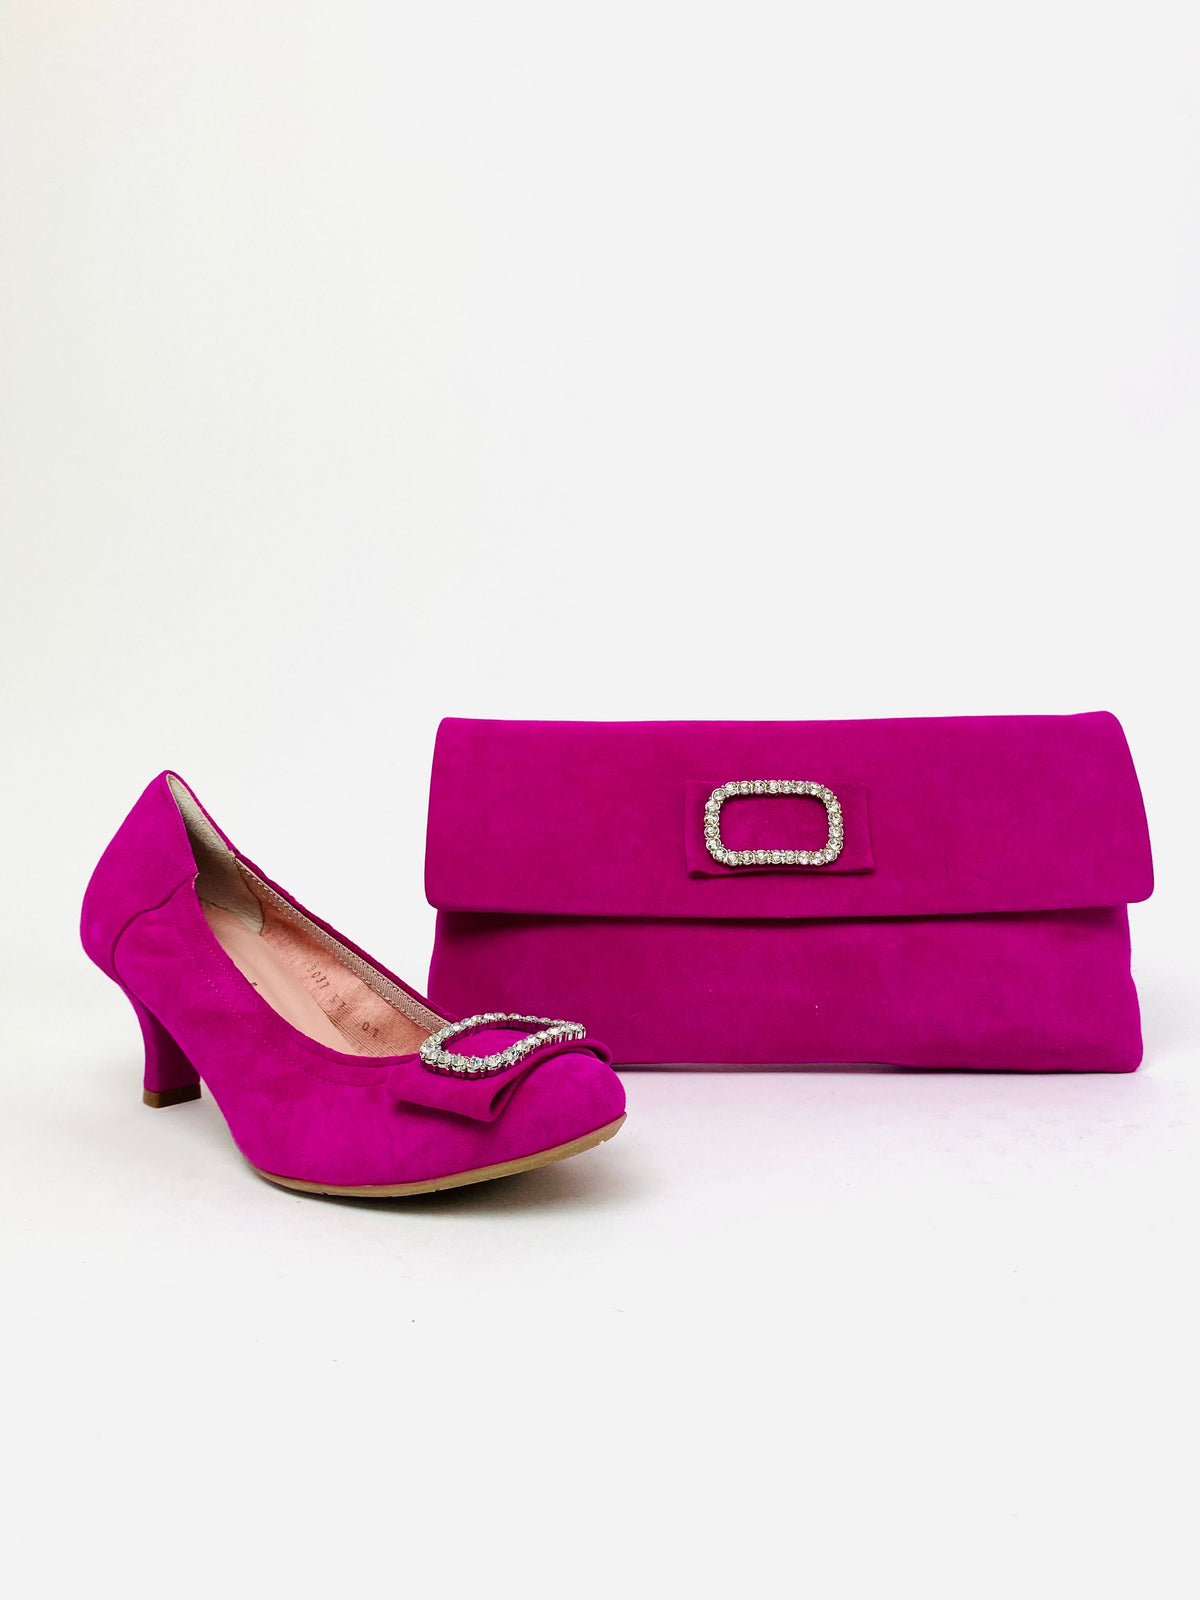 Le Babe - Bomilly Fuschia Pink Clutch bag*